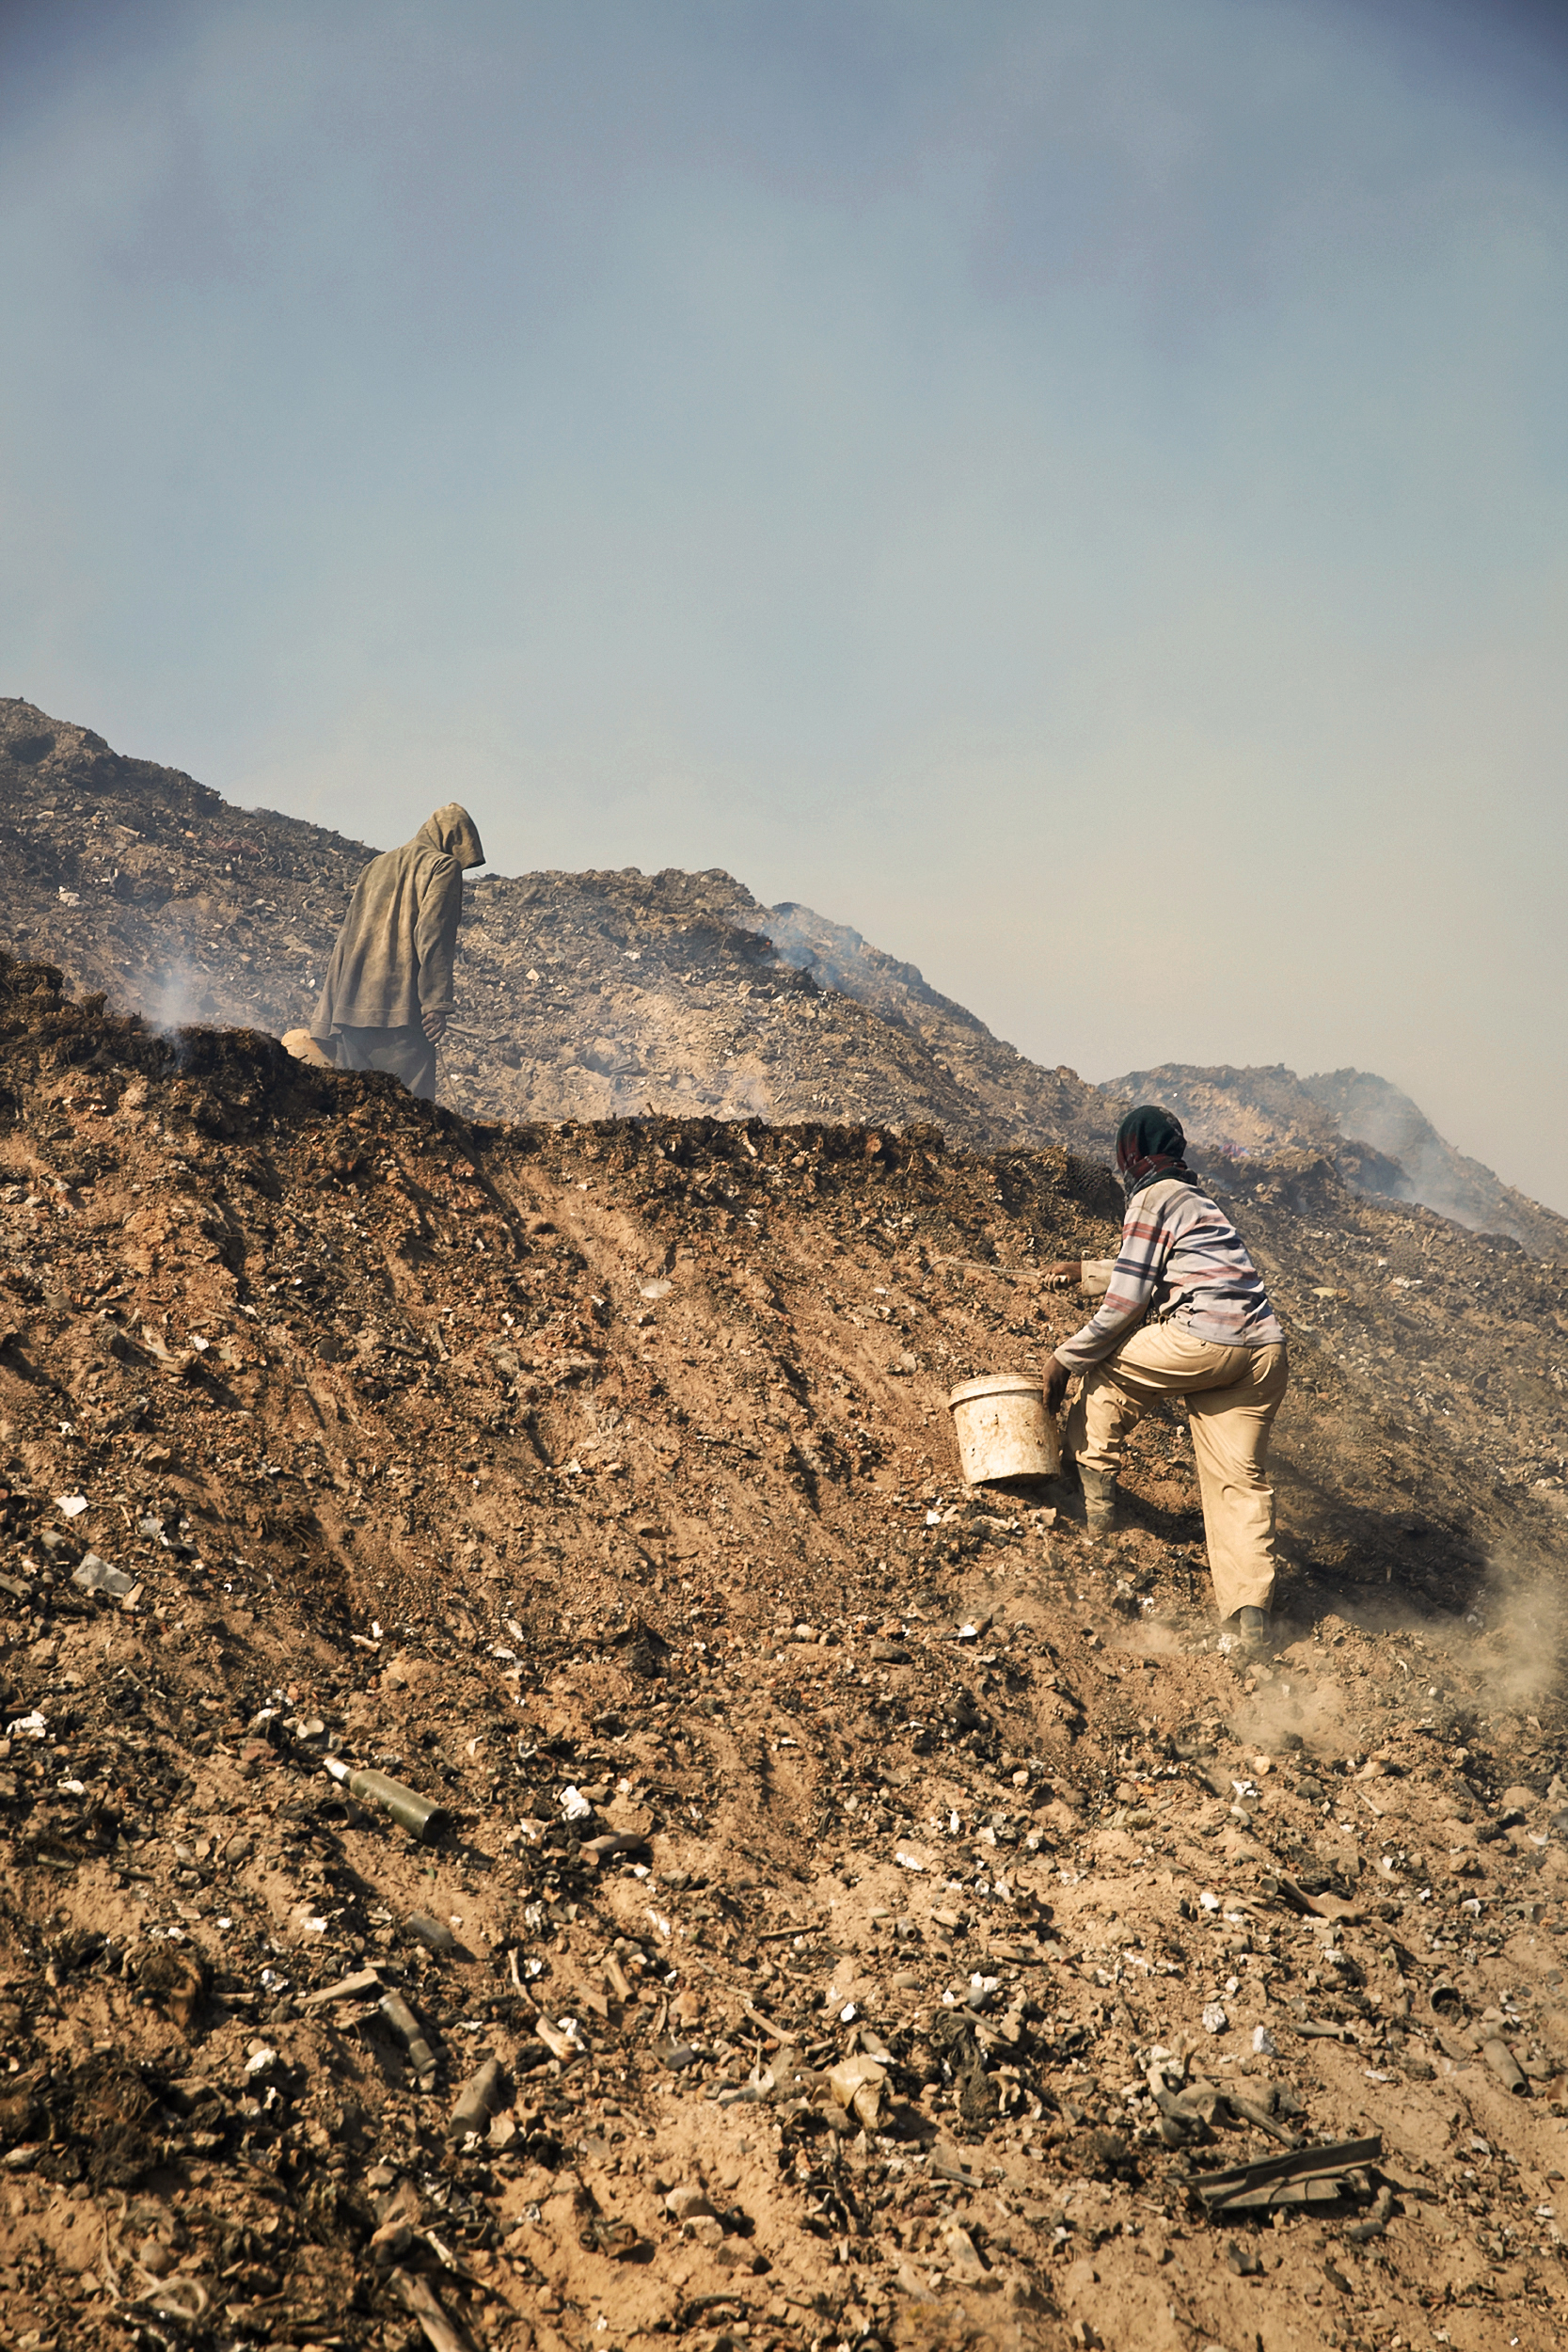  "Pickers"  searching for materials to resell as the eek out a living at the Koshe Landfill site.&nbsp;Each picker specializes in metal, foam or PVC pipe that they'll later resell. Most make less than $1 per day, having few other options for work.  &